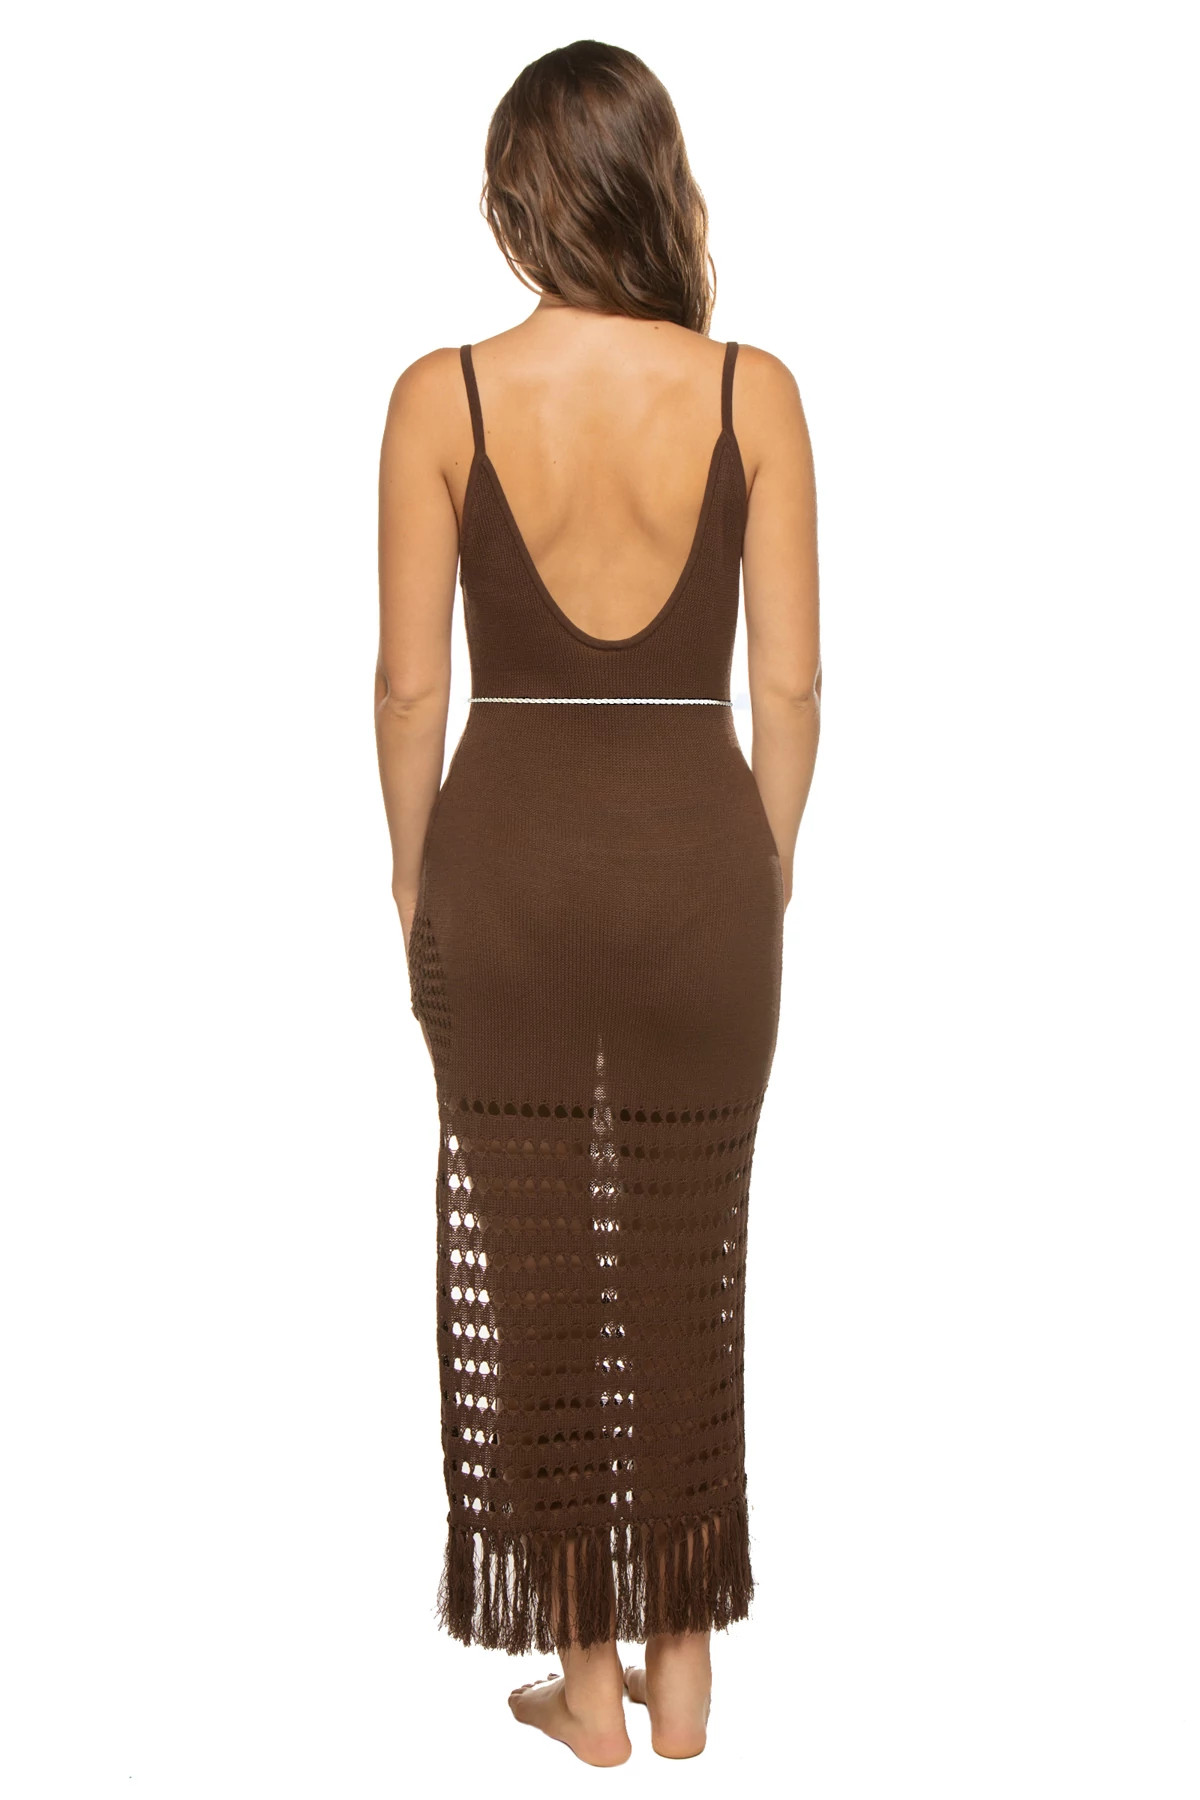 BROWN Molly Maxi Dress image number 2